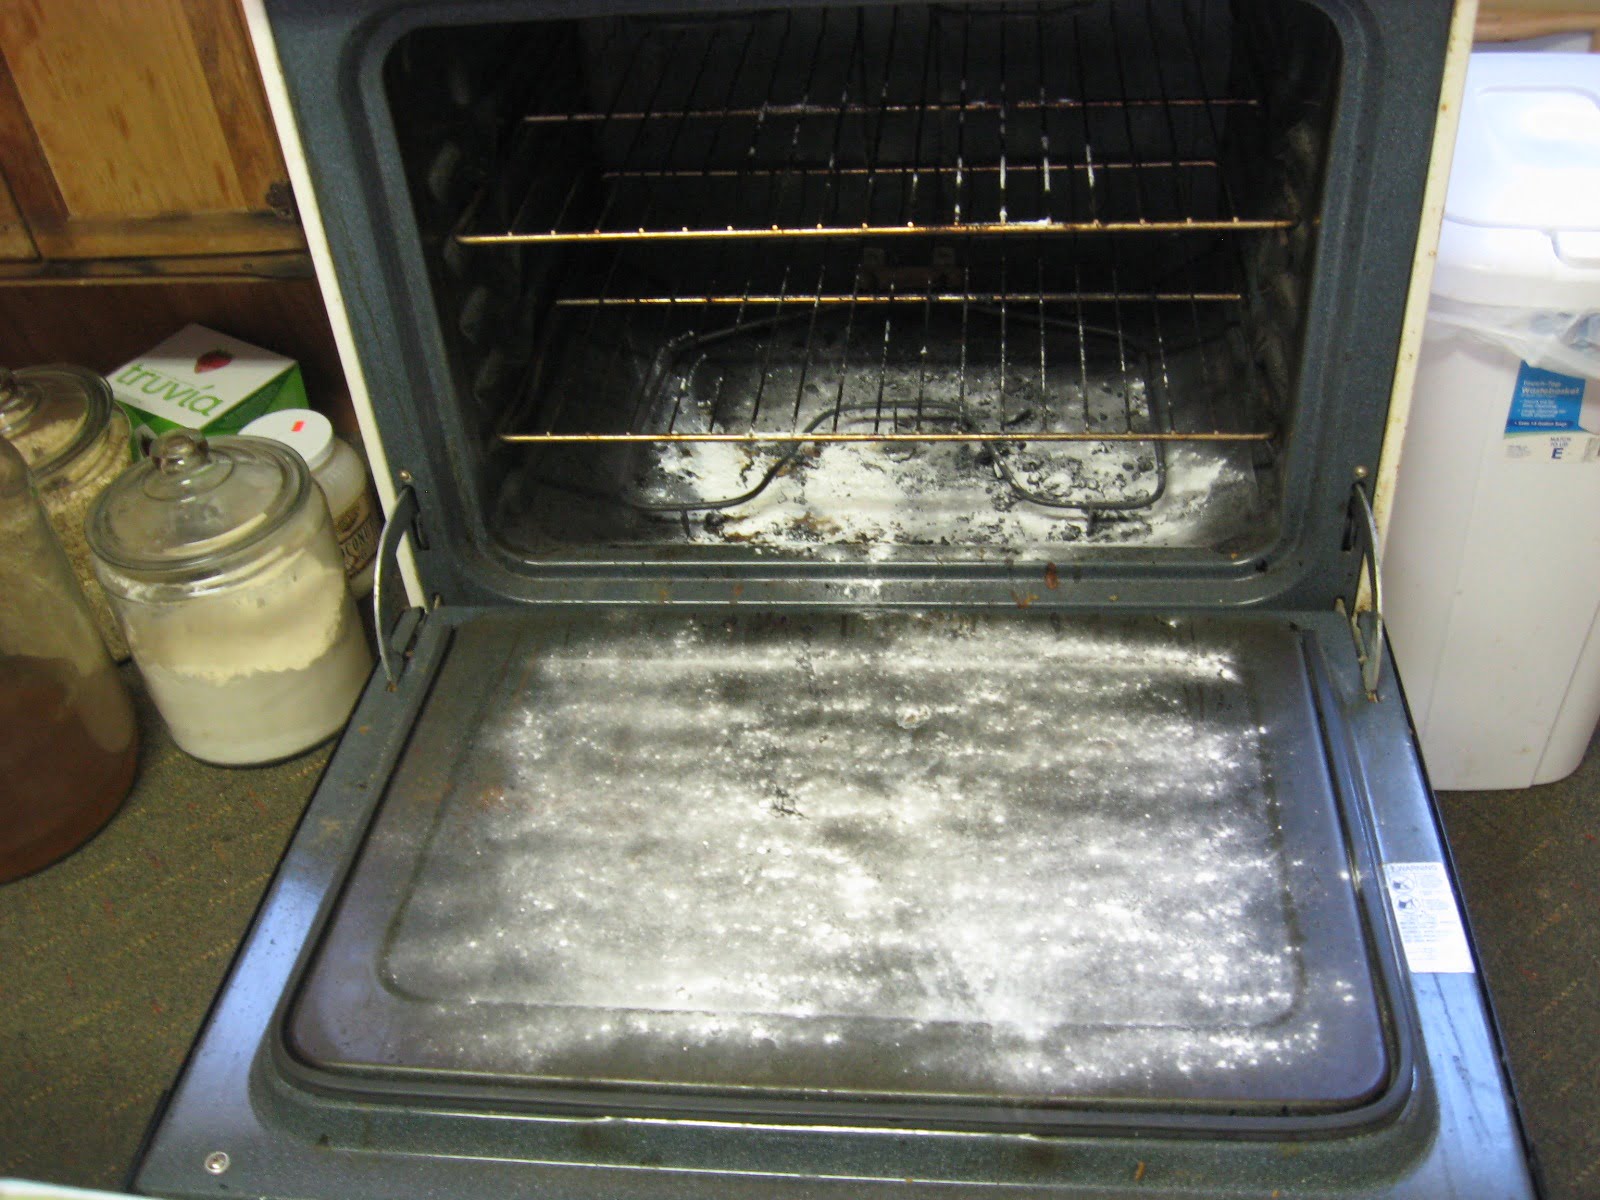 Clean Oven With Baking Soda And Vinegar